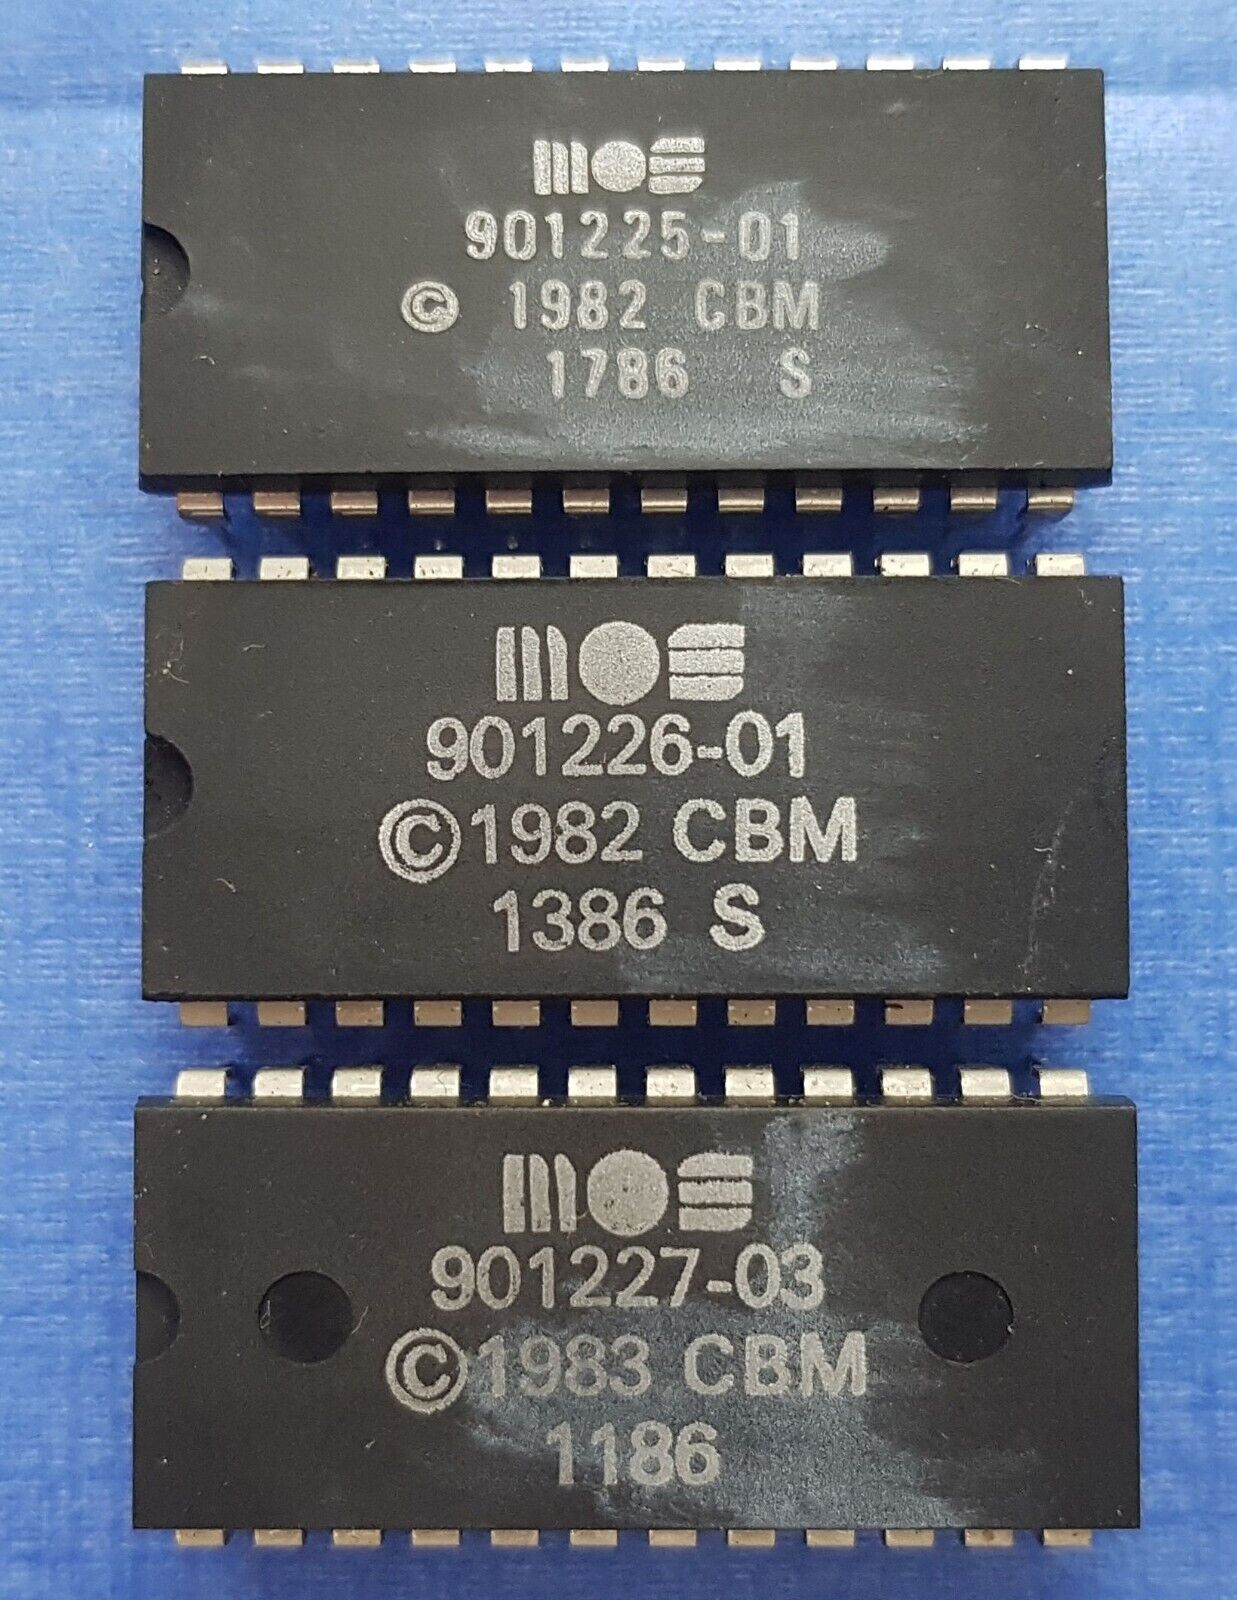 MOS 901225-01/901226-01/901227-03 ROM set Chips for COMMODORE 64, Genuine part.